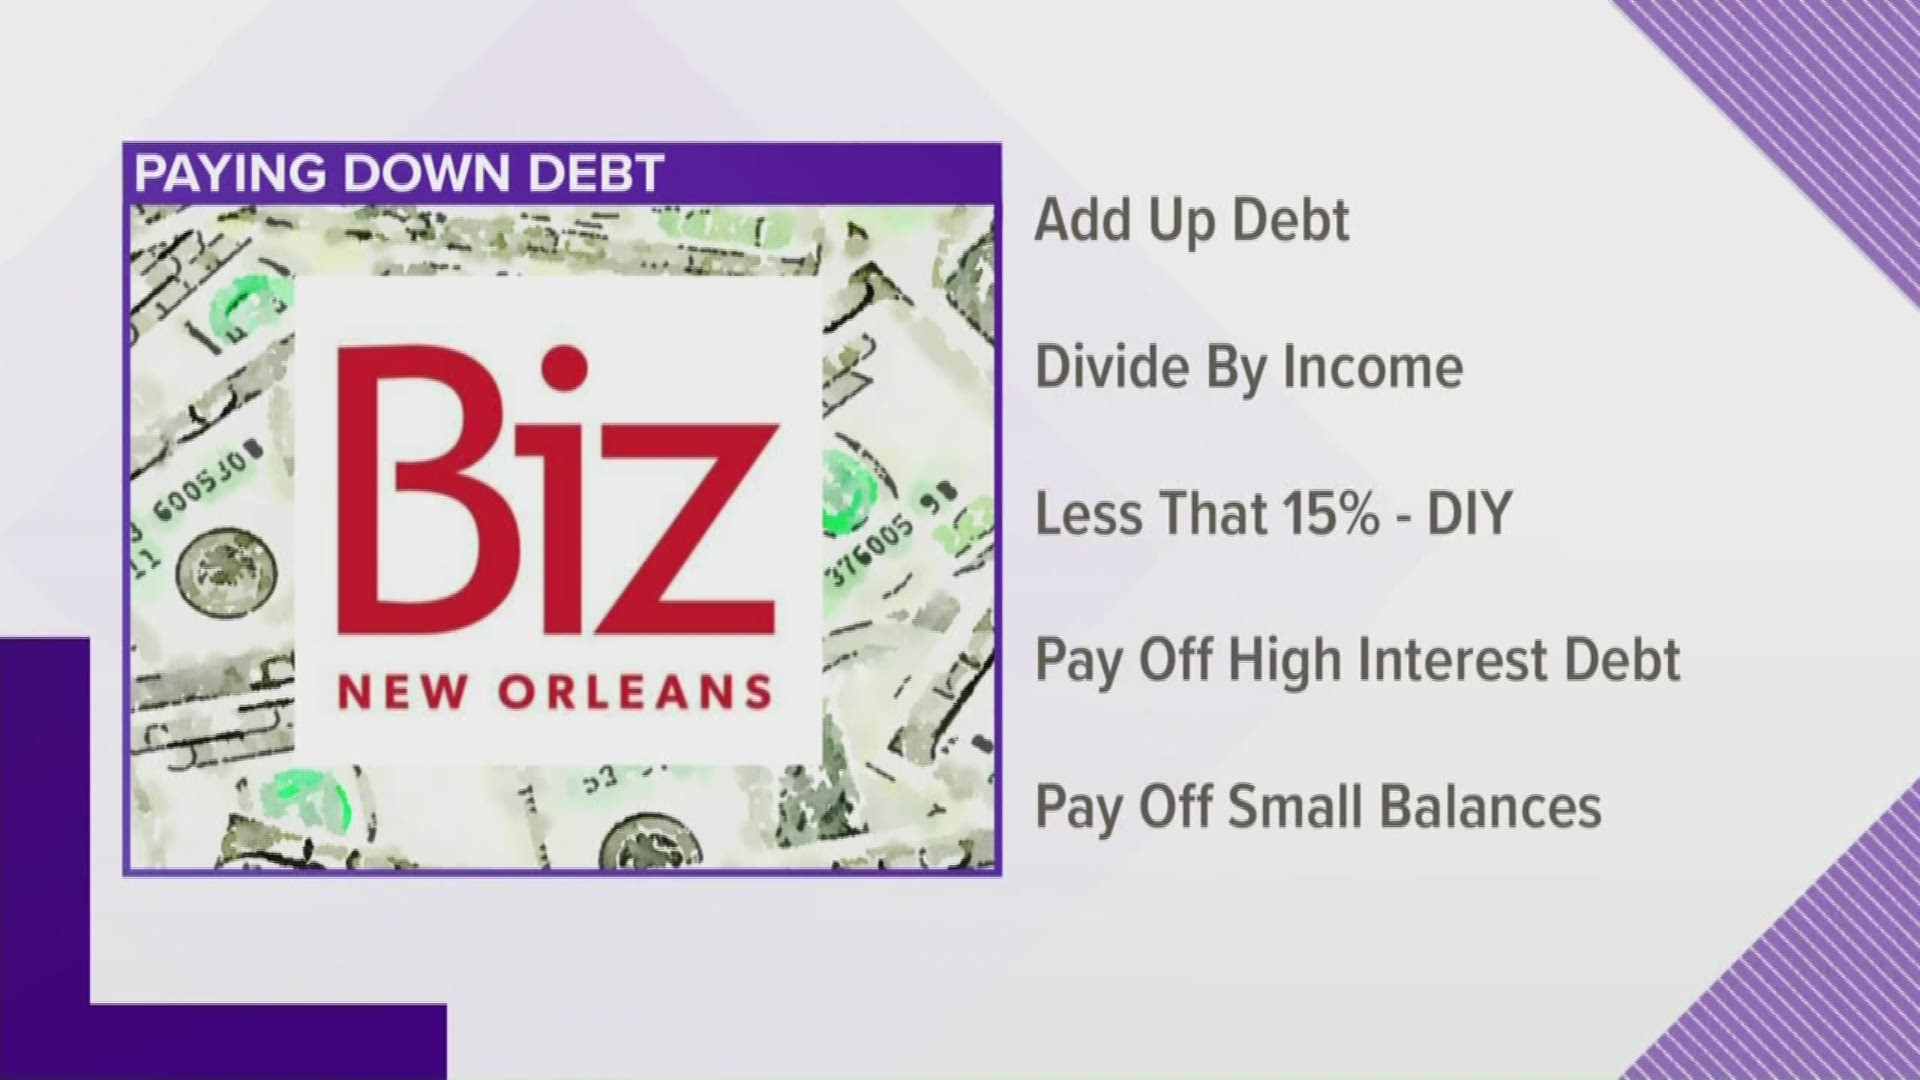 According to the Federal Reserve, consumer debt has reached $1.3 trillion. Leslie Snadowsky with Biz New Orleans says fastest way to dig yourself out of debt is to find your starting point.